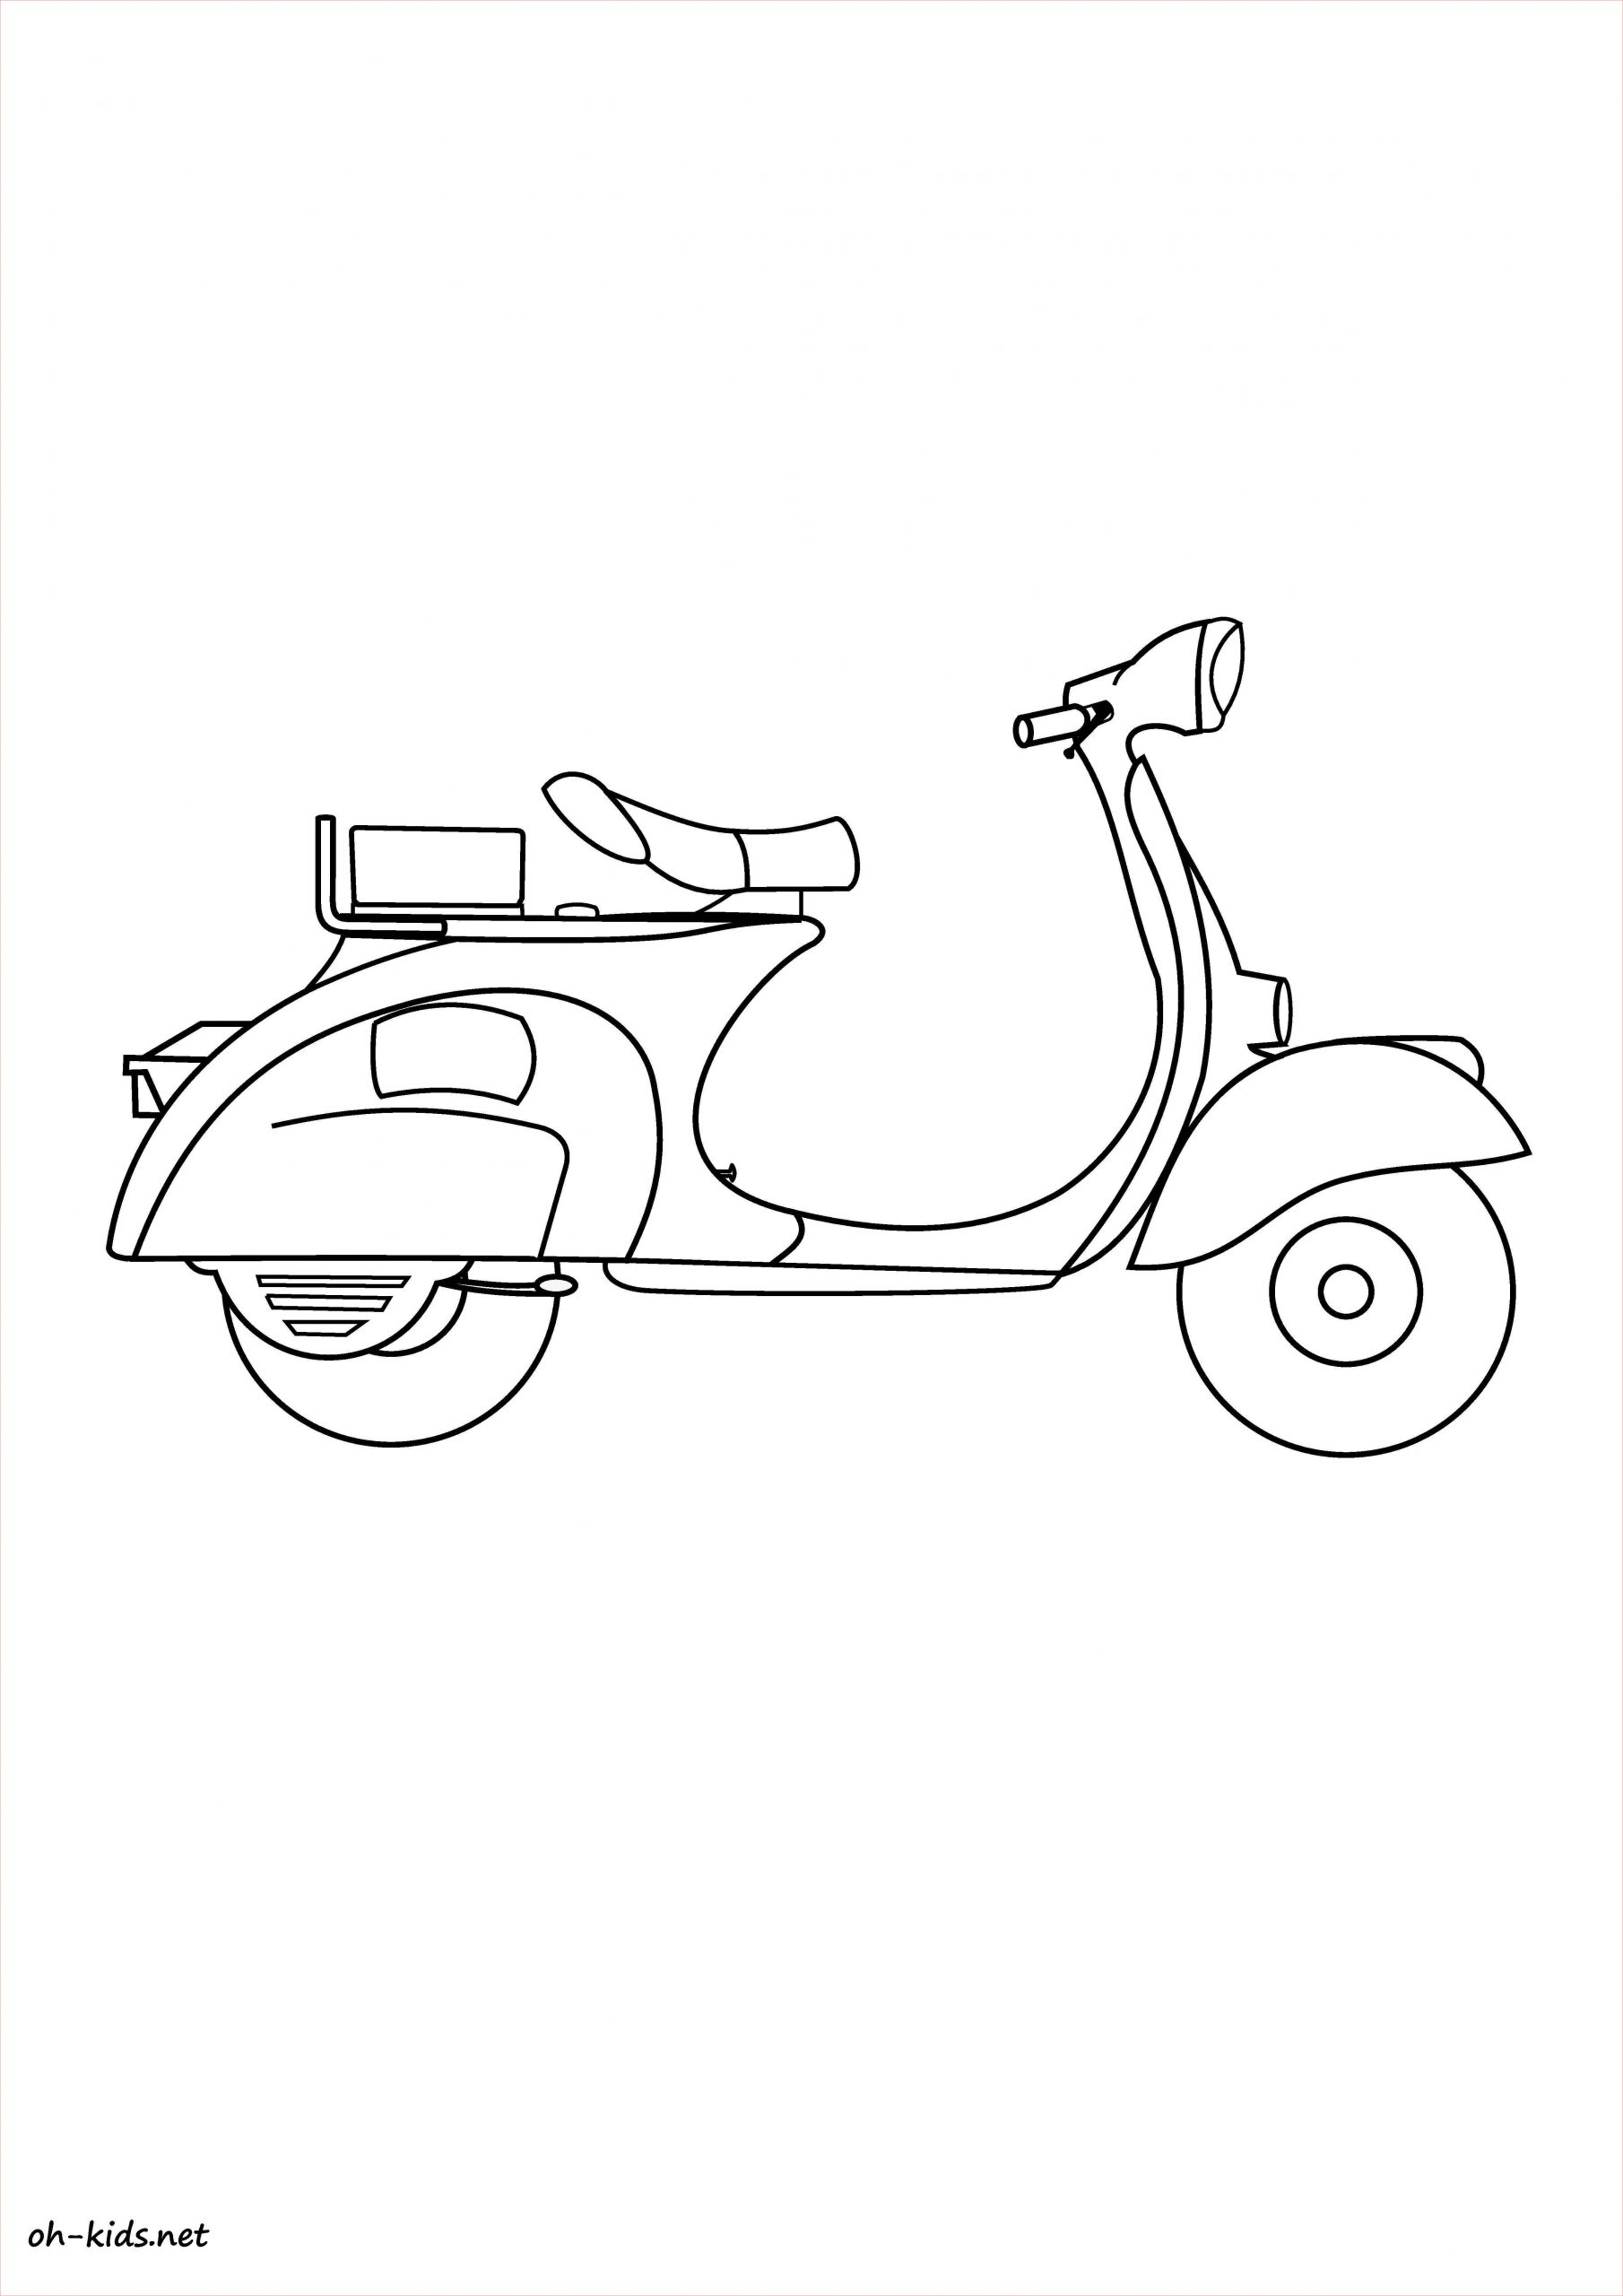 15 coloriage scooter des mers